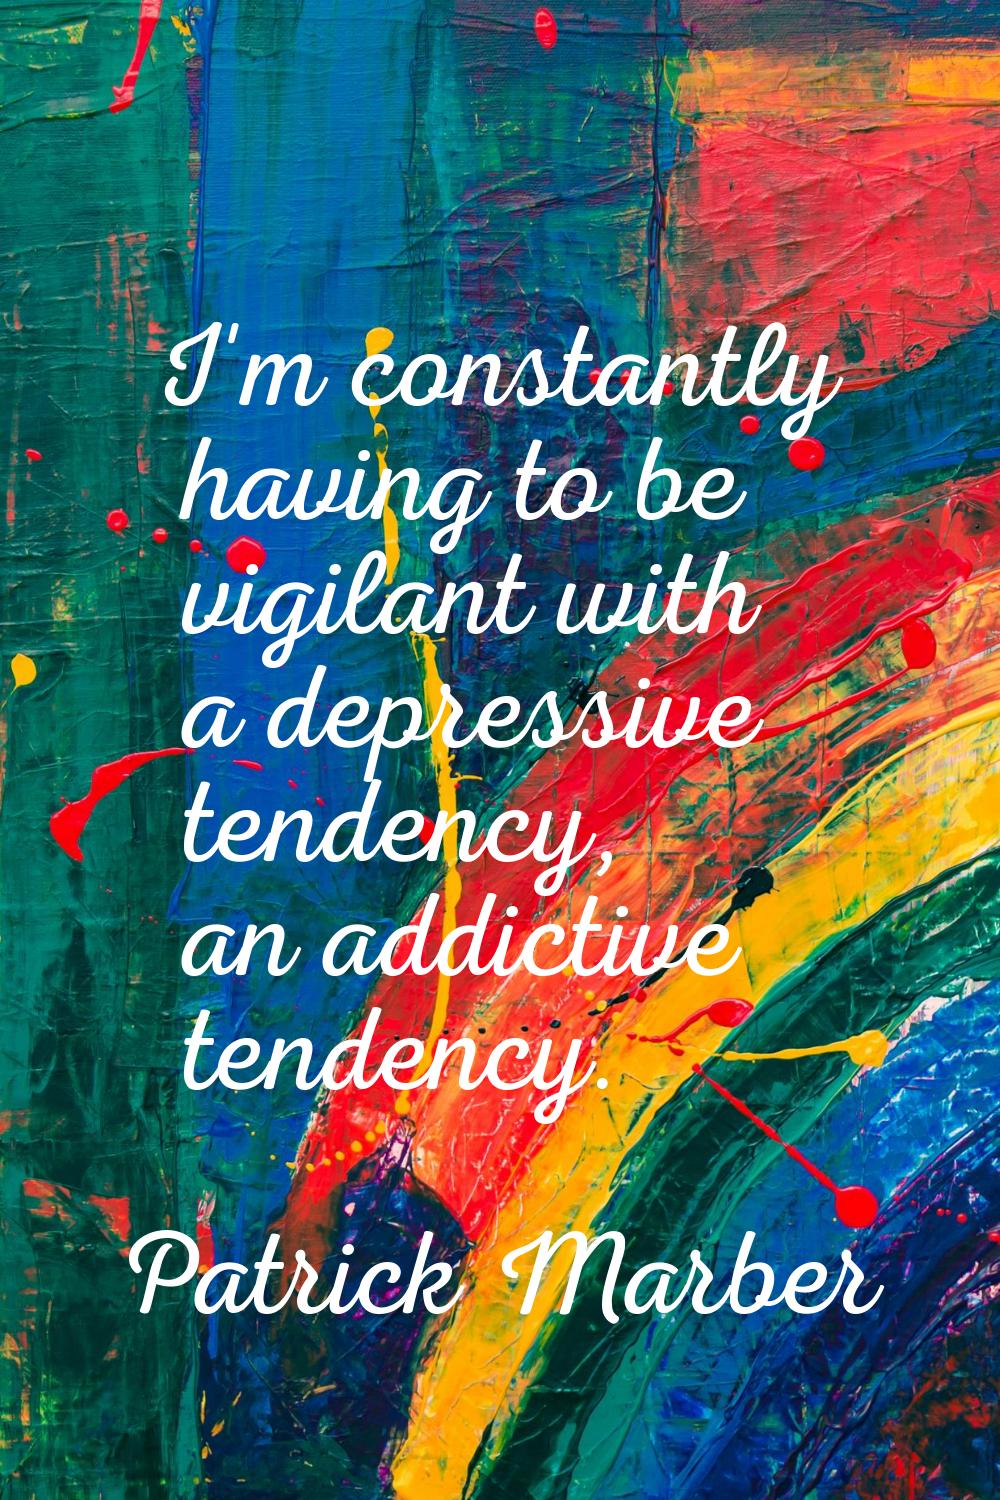 I'm constantly having to be vigilant with a depressive tendency, an addictive tendency.